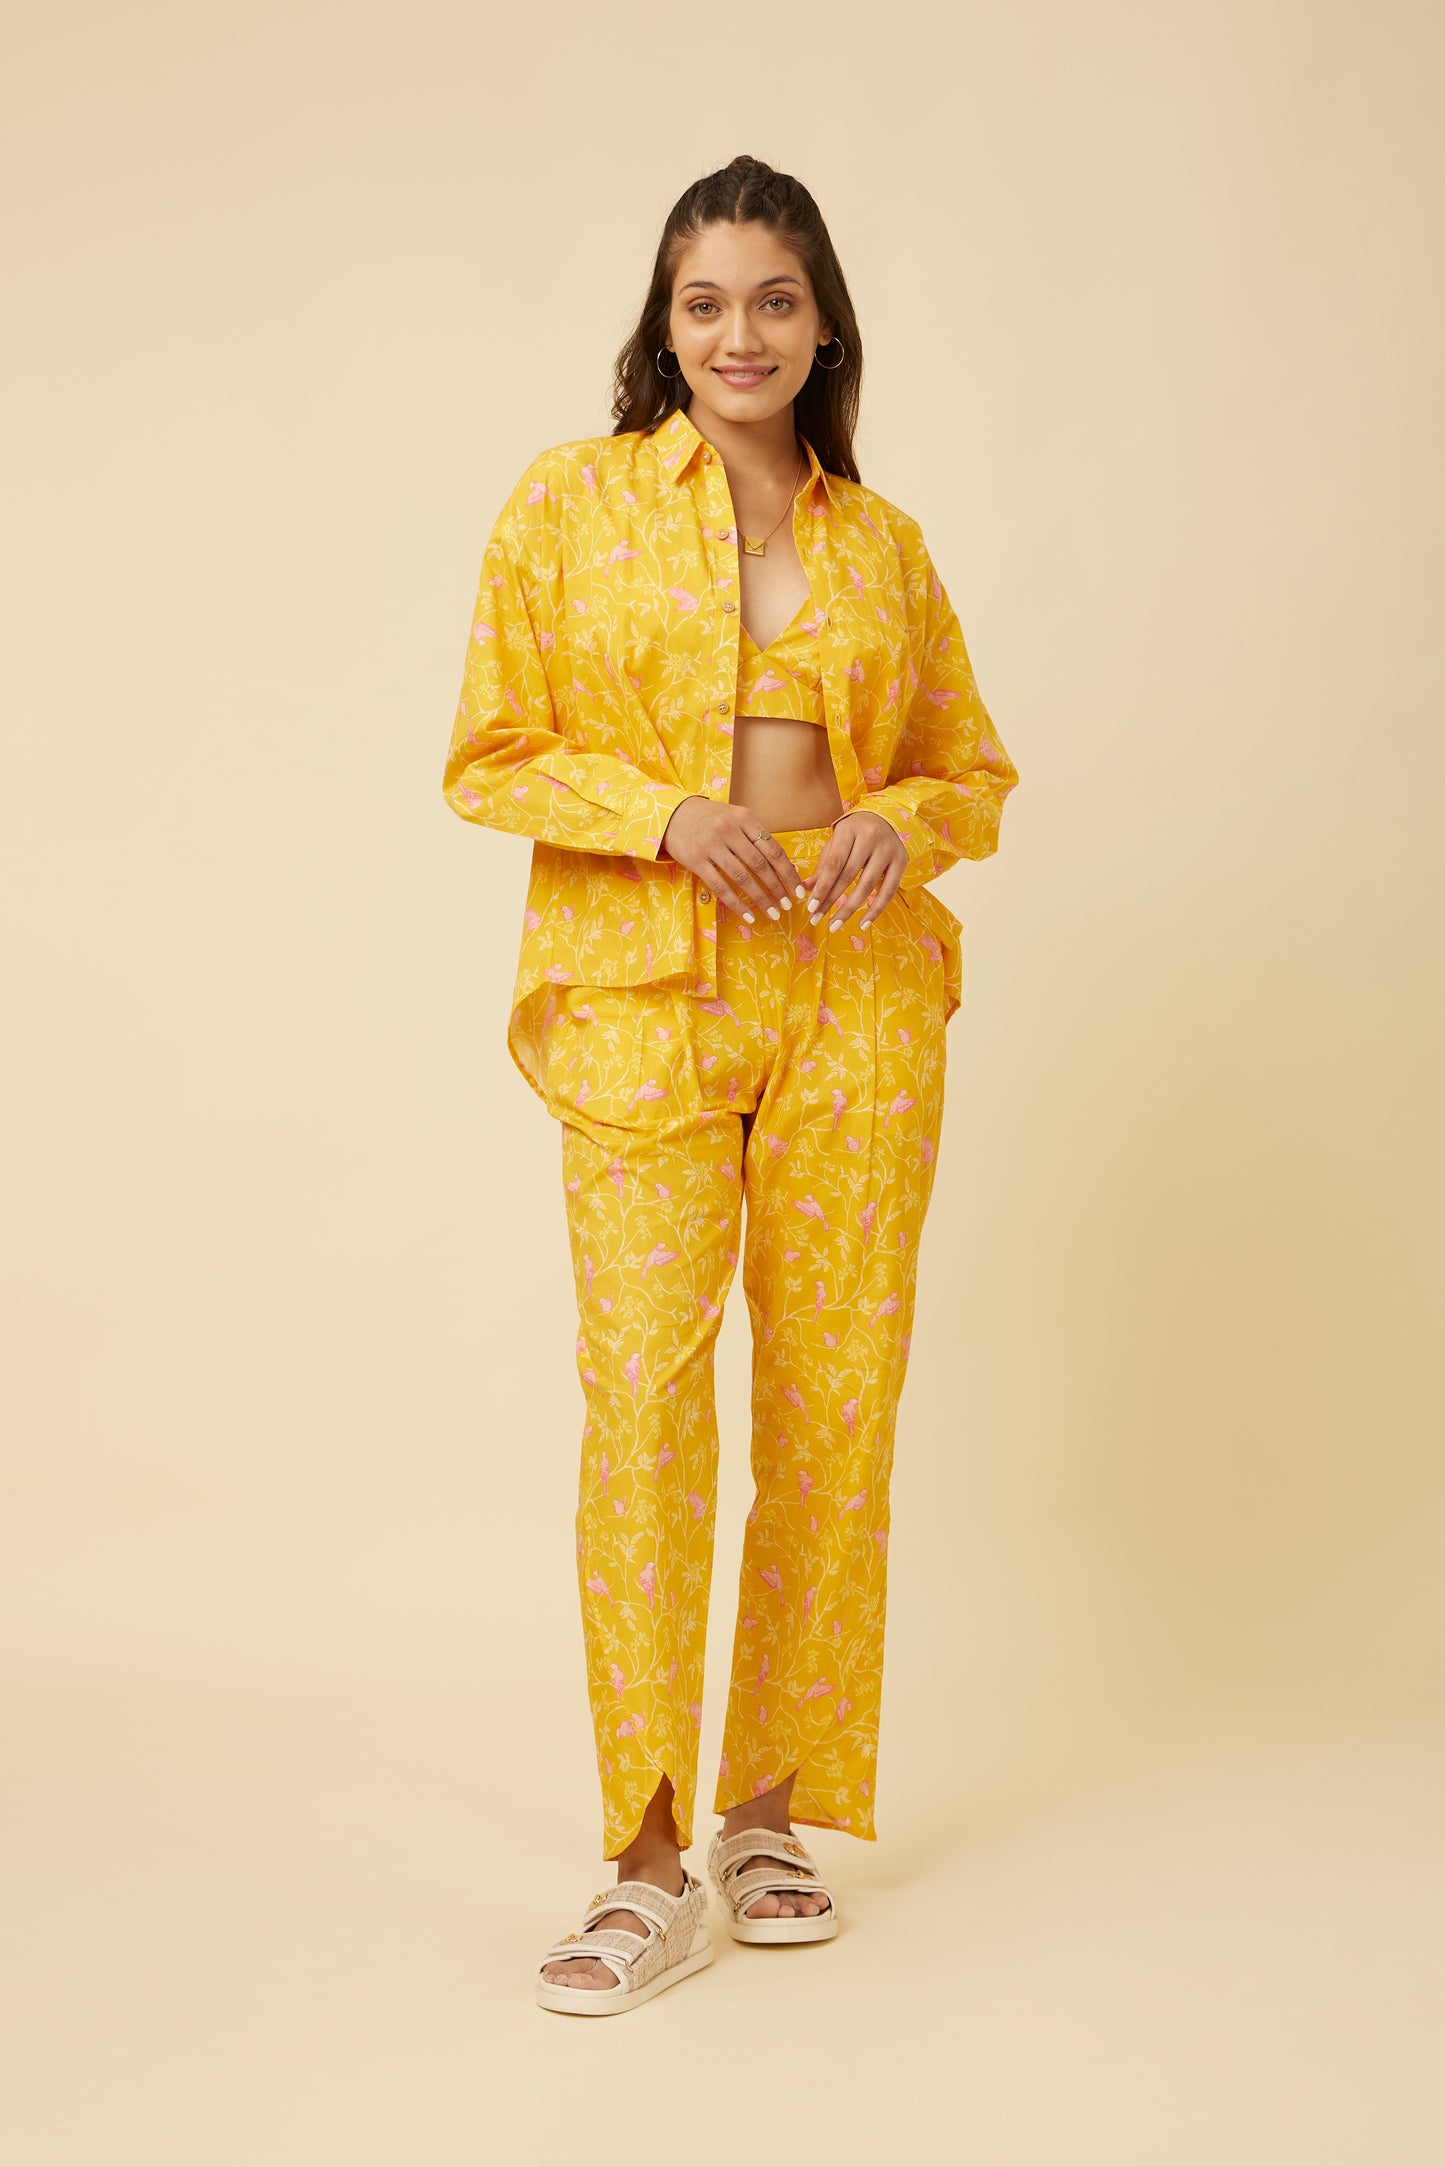 Model wearing the Peela Sunshine Full-Sleeve Shirt, styled untucked over matching pants, giving a relaxed and cheerful vibe, with a bralette peeking through